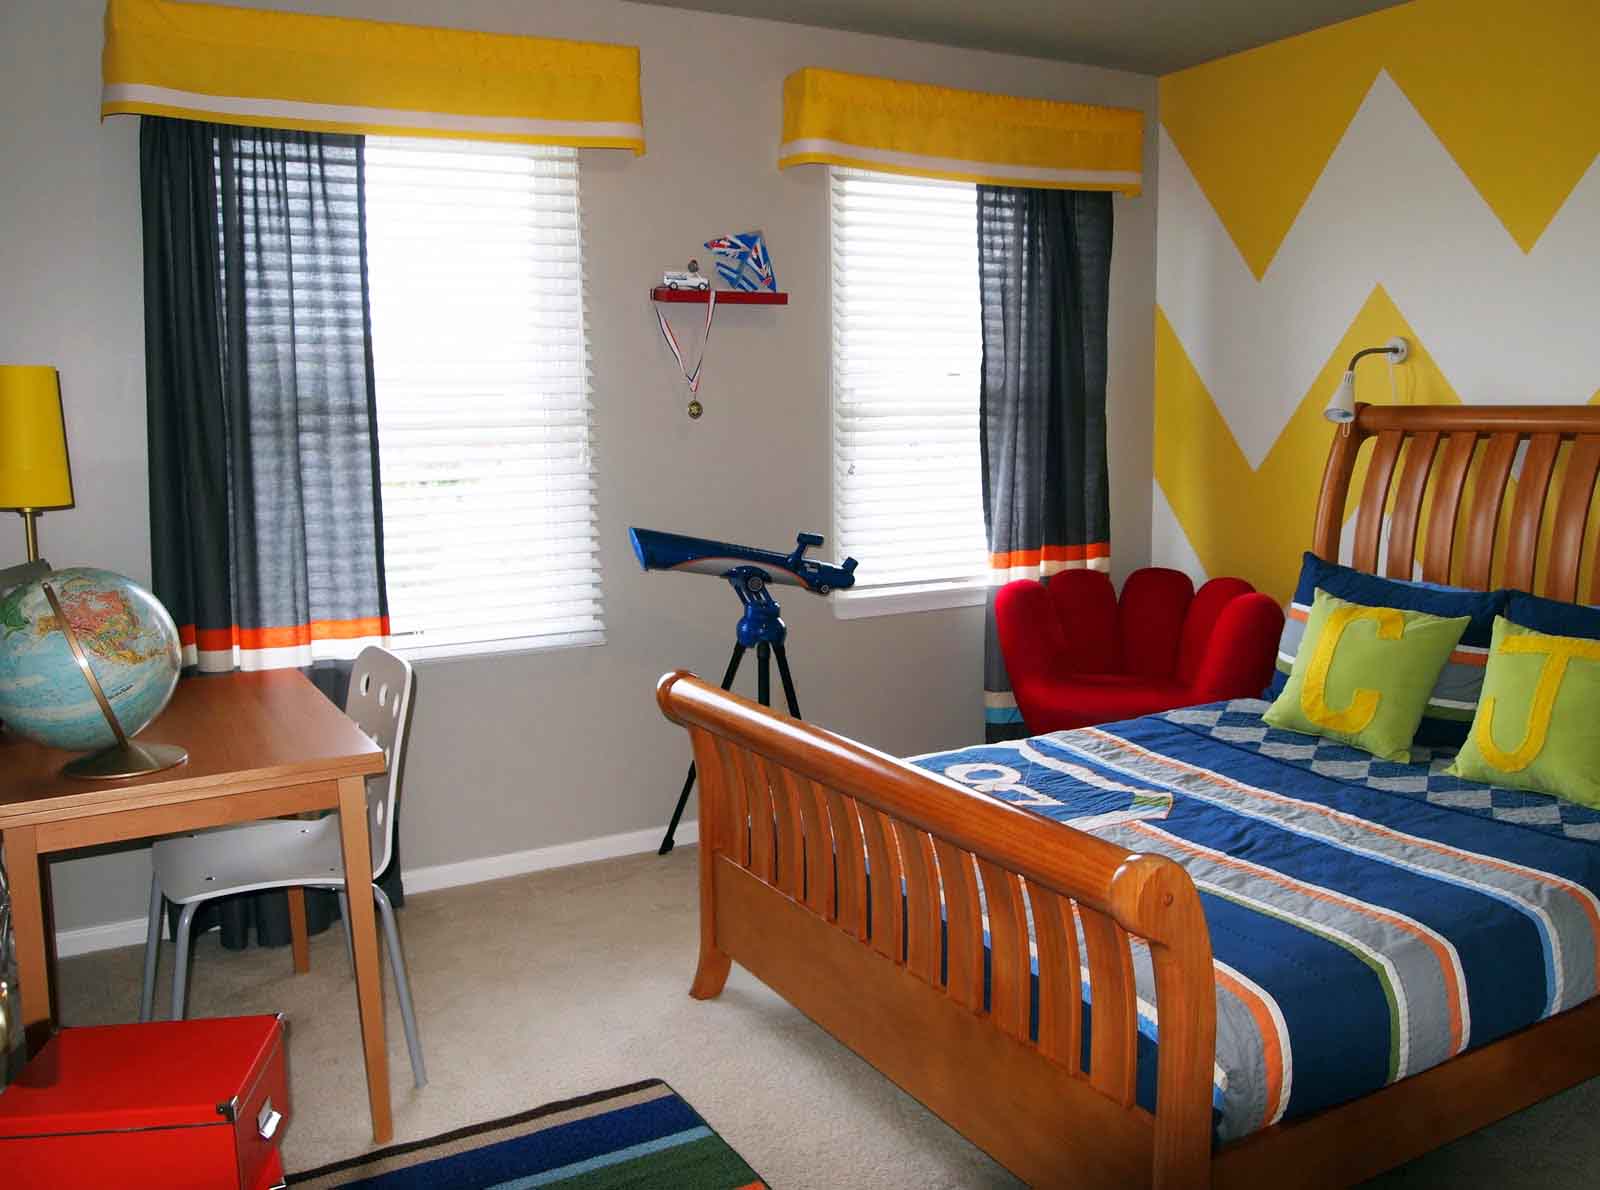 Kids Bedroom And Adorable Kids Bedroom Applying White And Yellow Accent Wall Color Matched With Black Kids Room Curtains Completed With Wooden Platform Bed Also Desk And Furnished With White And Red Chair Decoration The Better Appearance Through The Kids Room Curtains